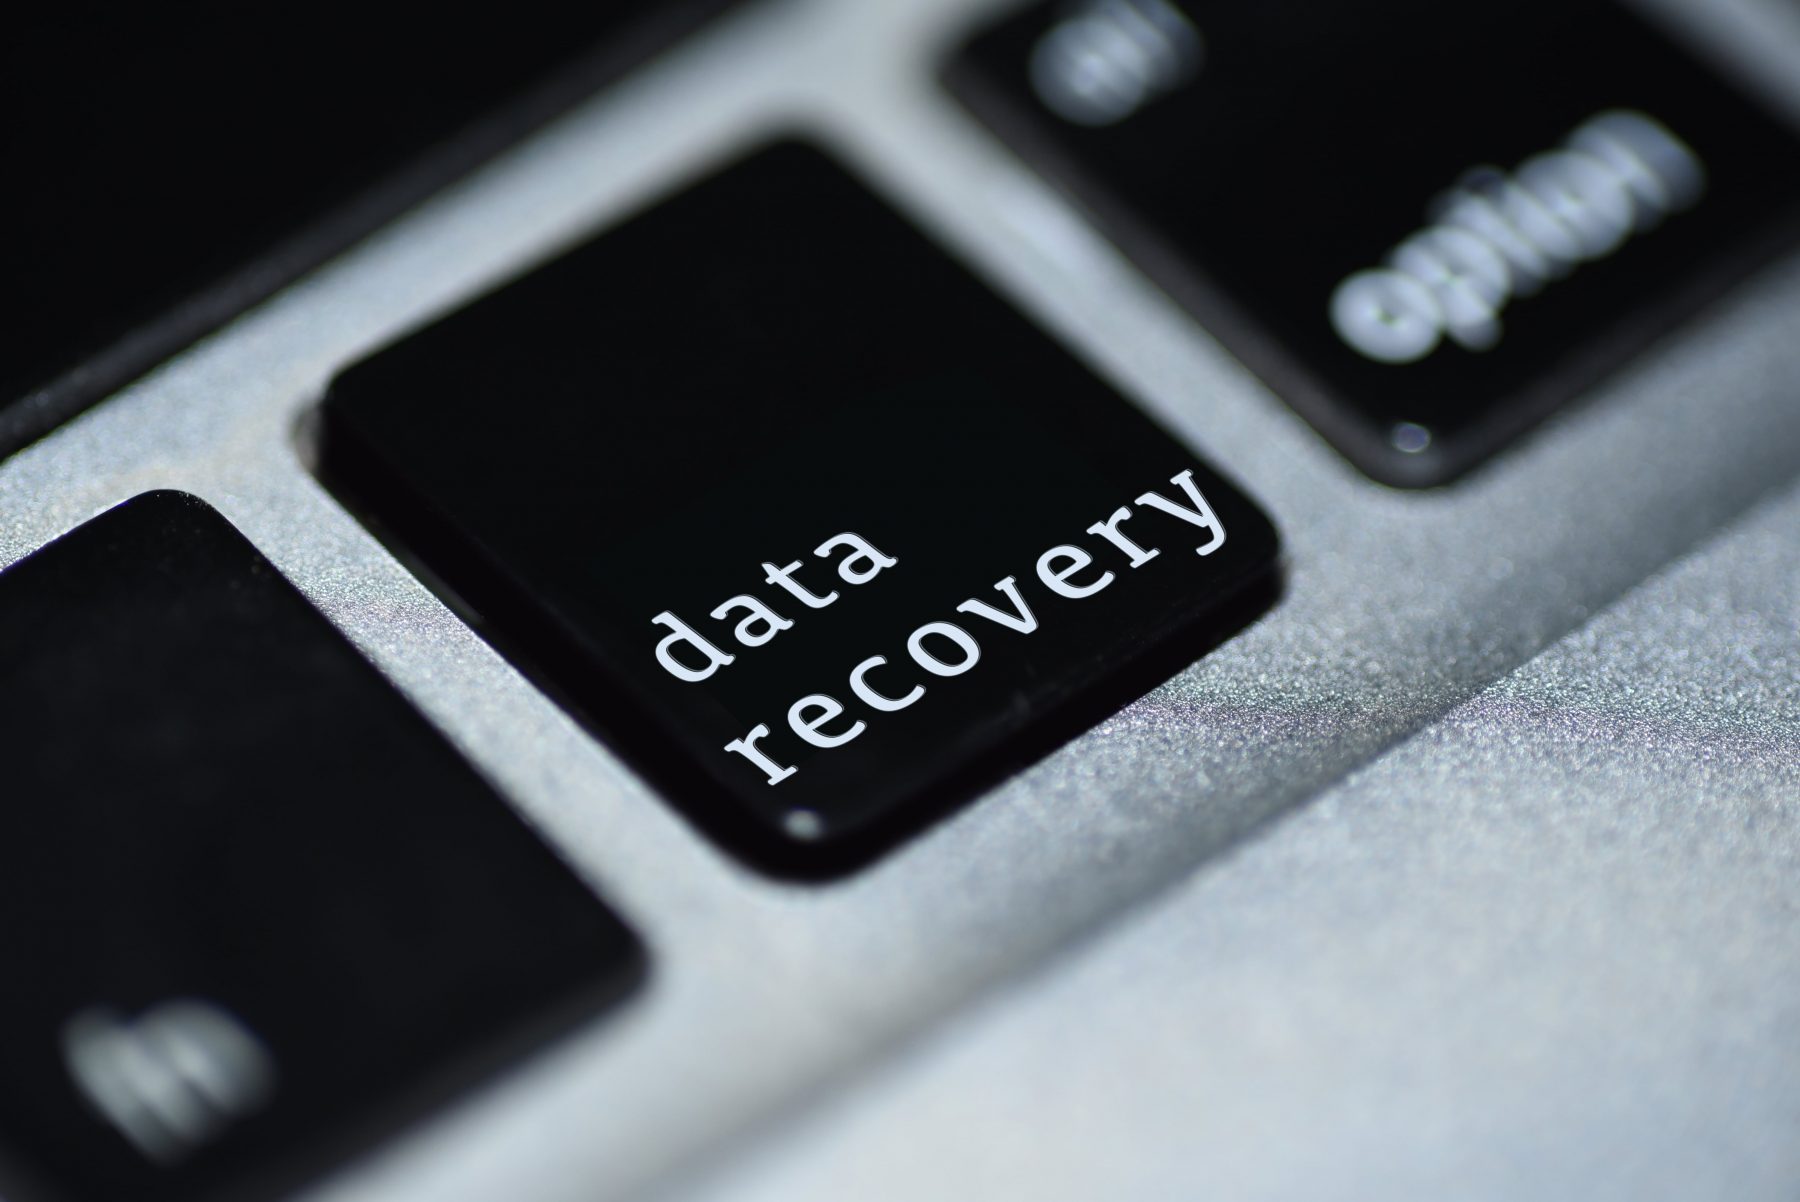 chip-off data recovery in Midrand